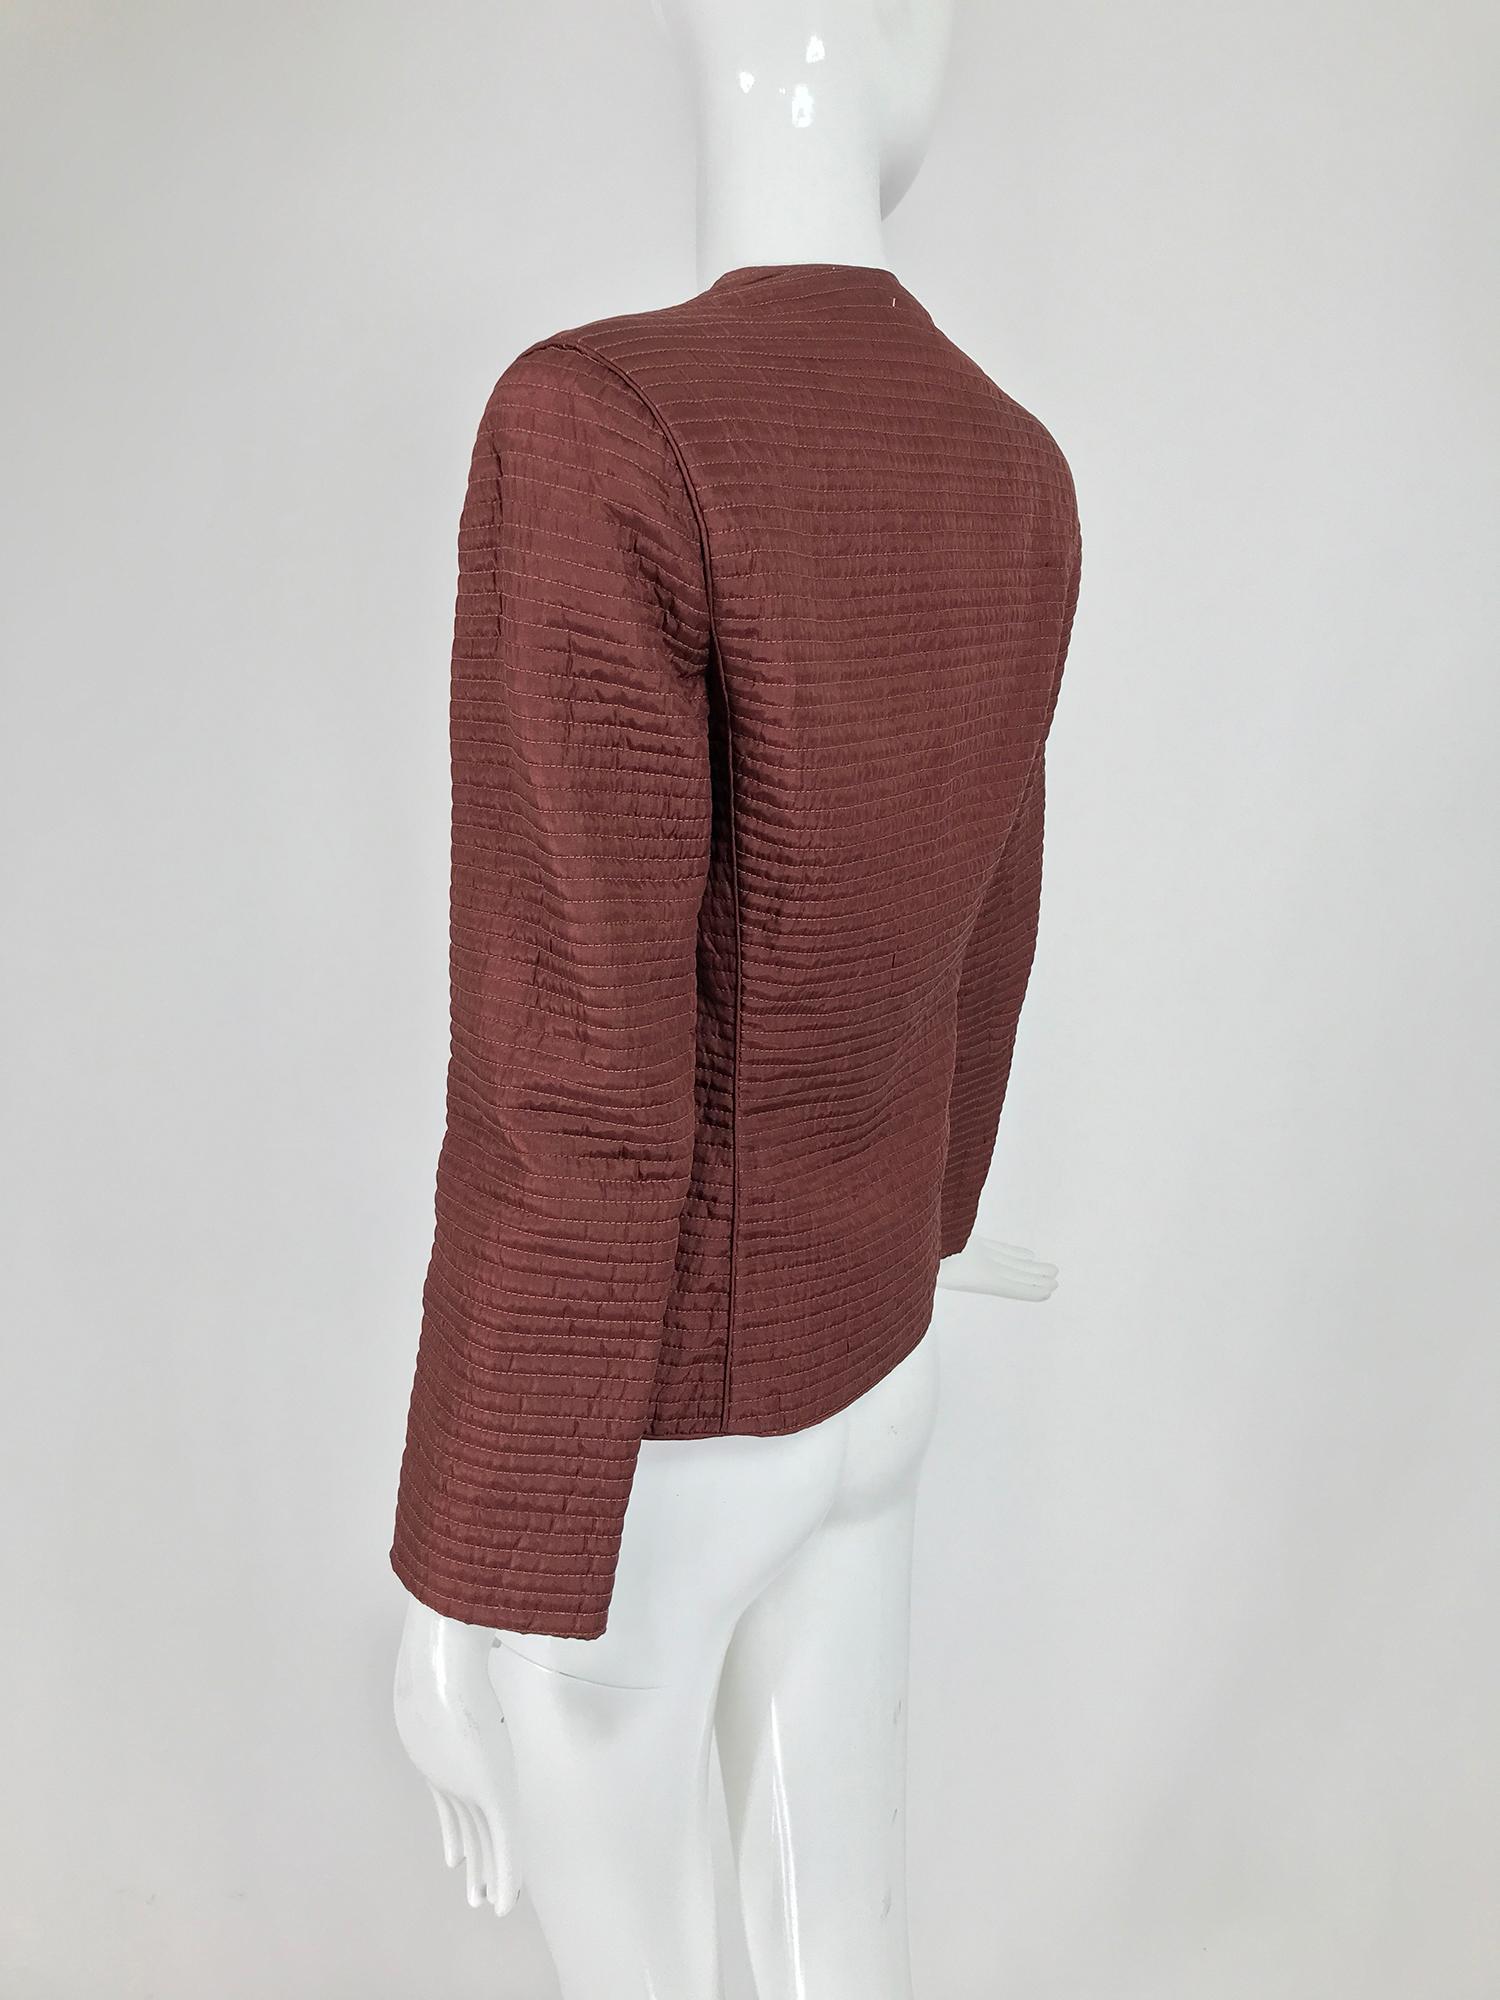 Mary McFadden Quilted Jacket in Rich Raisin Brown 1970s 5